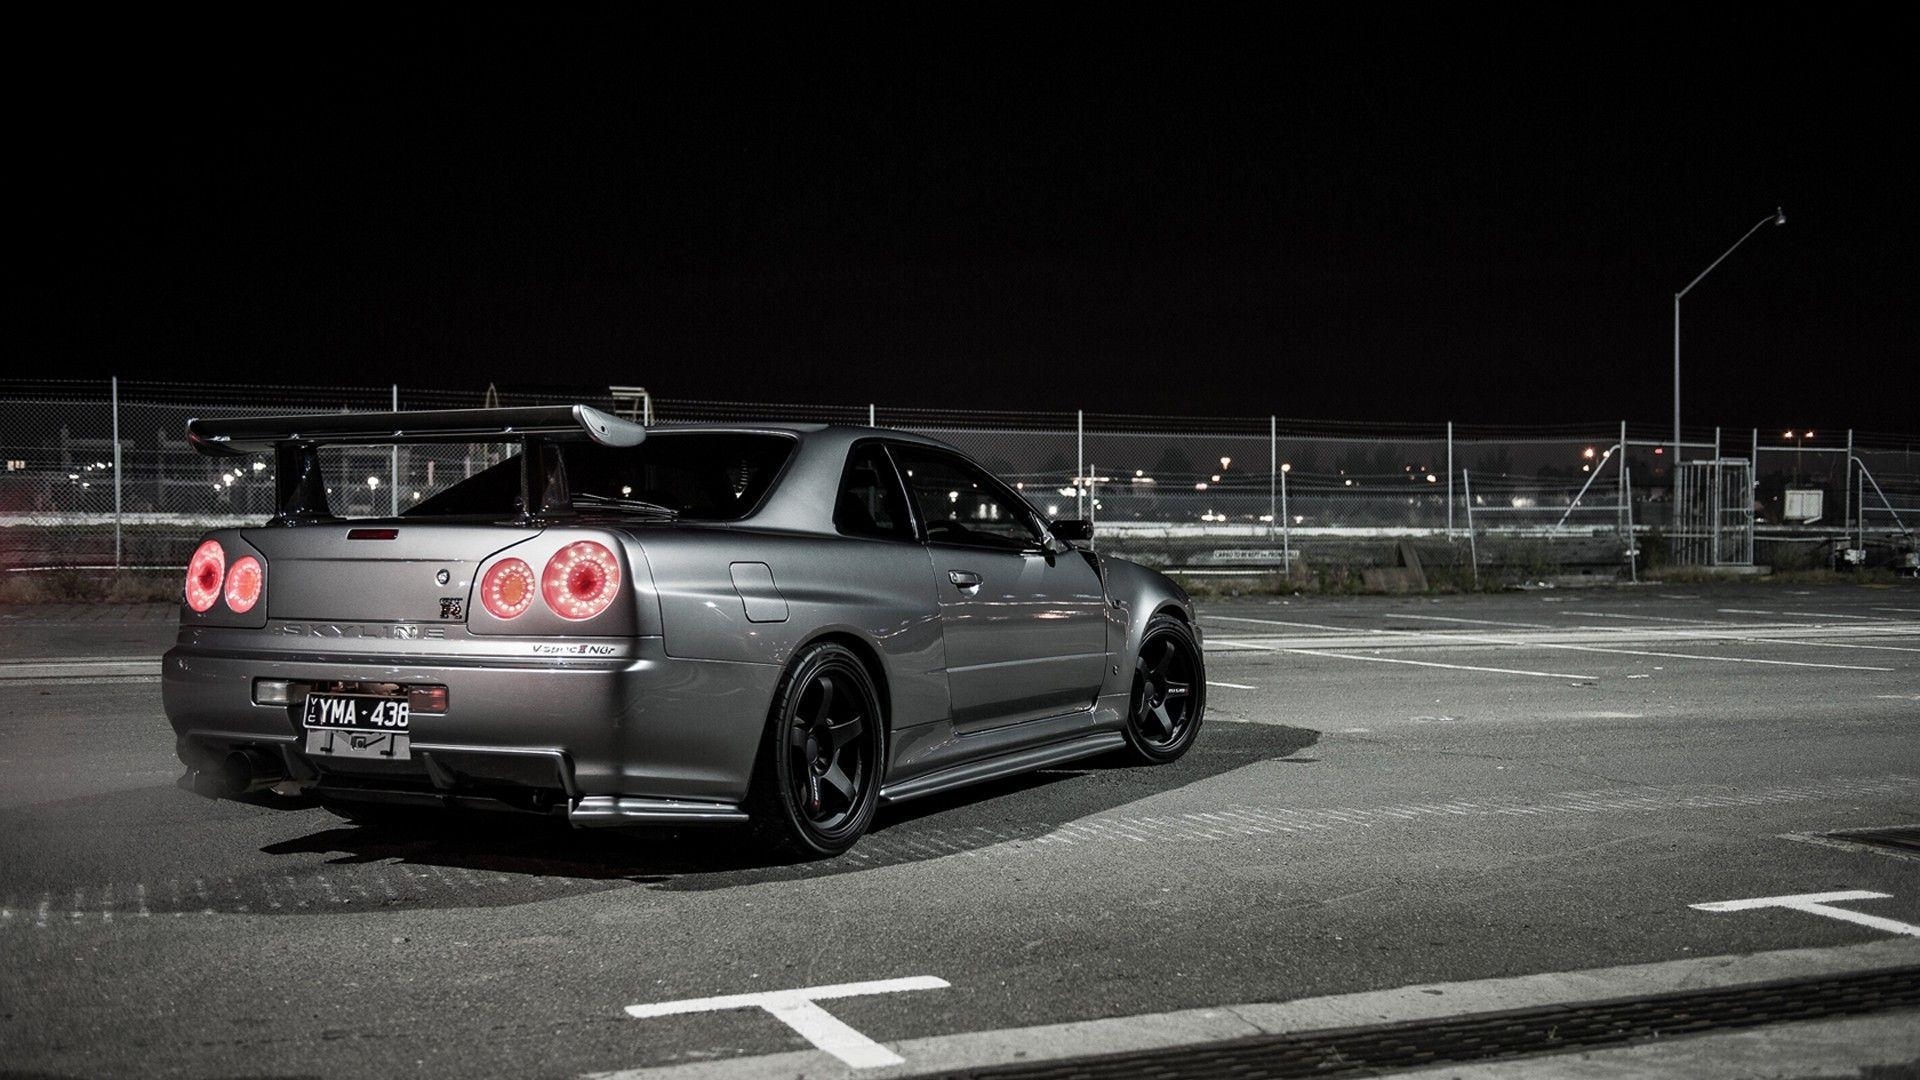 10 Latest Nissan Skyline R34 Wallpaper 1920X1080 FULL HD 1080p For PC Background